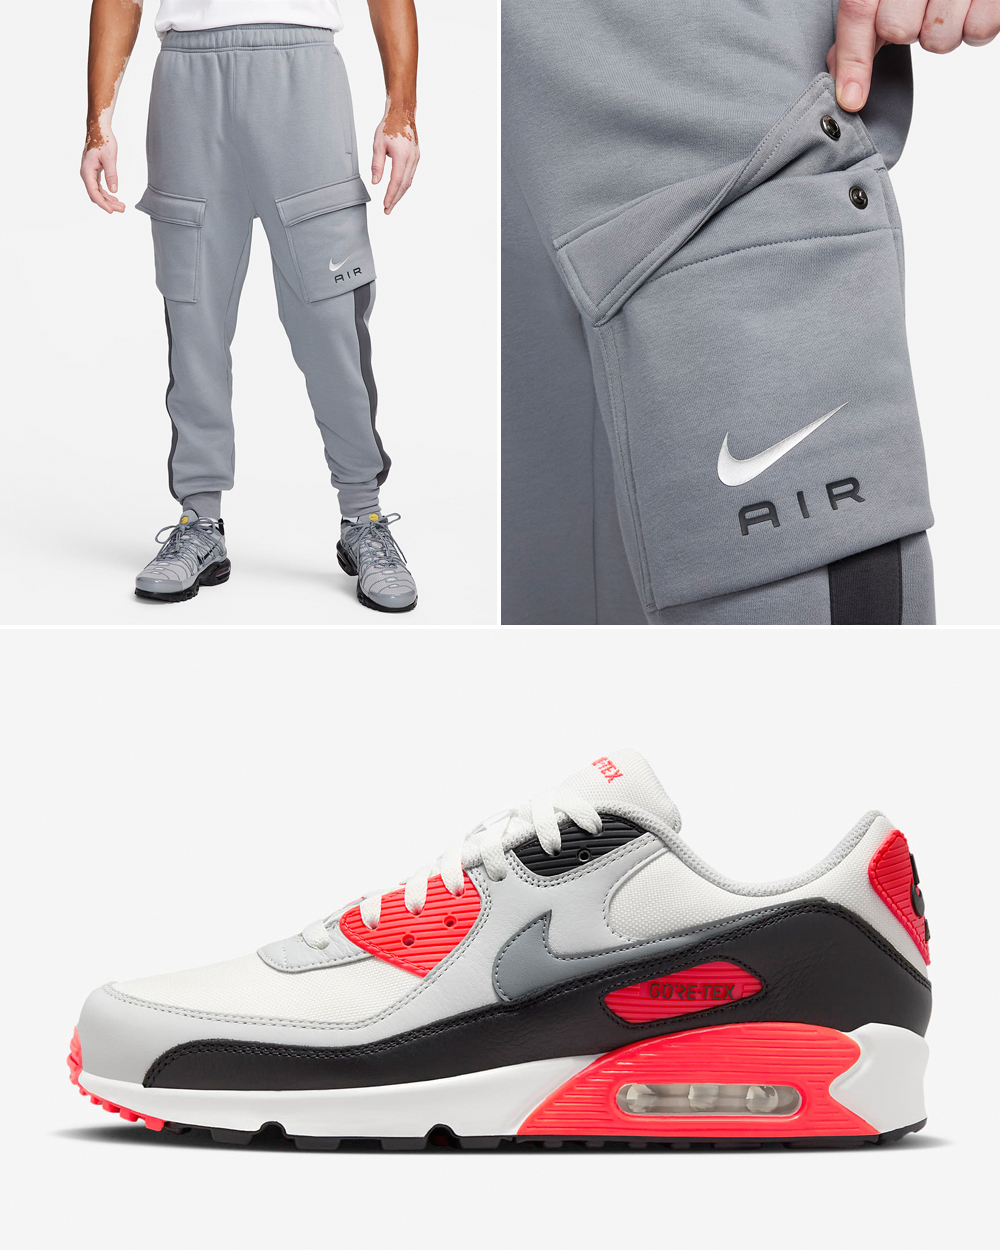 Nike-Air-Max-90-Gore-Tex-Infrared-Pants-Matching-Outfit.